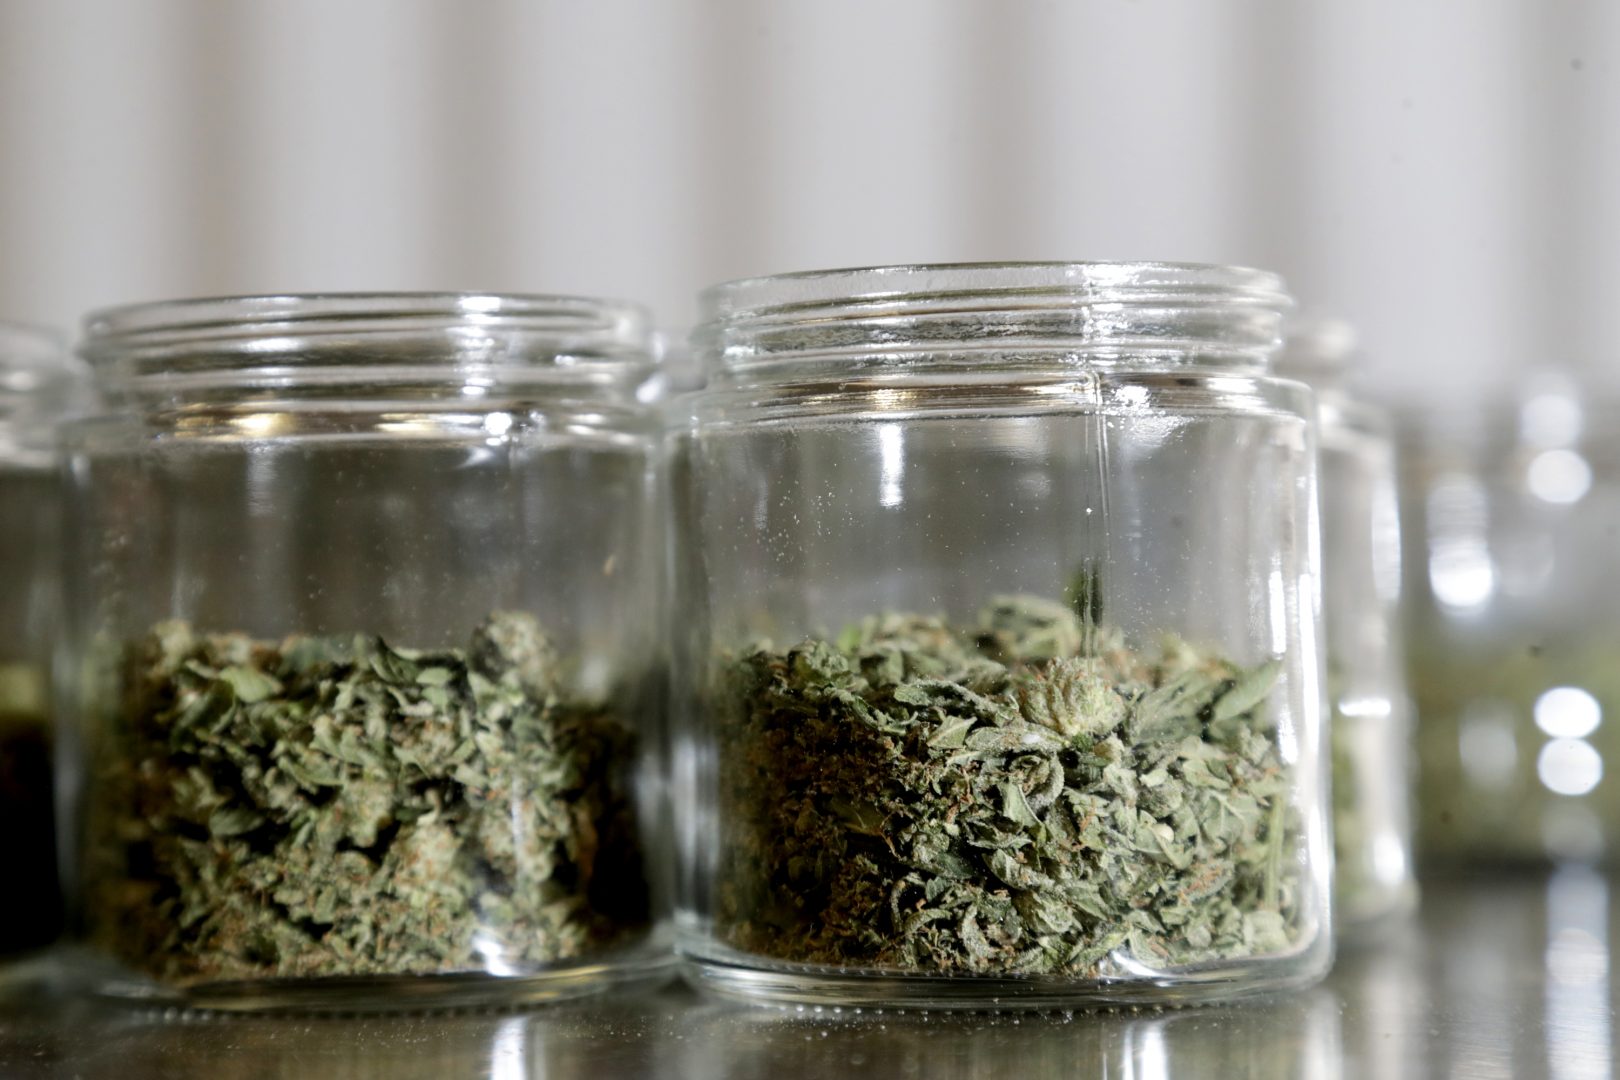 FILE PHOTO: Marijuana buds are seen in jars as they are sorted at Compassionate Care Foundation's grow house, Friday, March 22, 2019, in Egg Harbor Township, N.J.